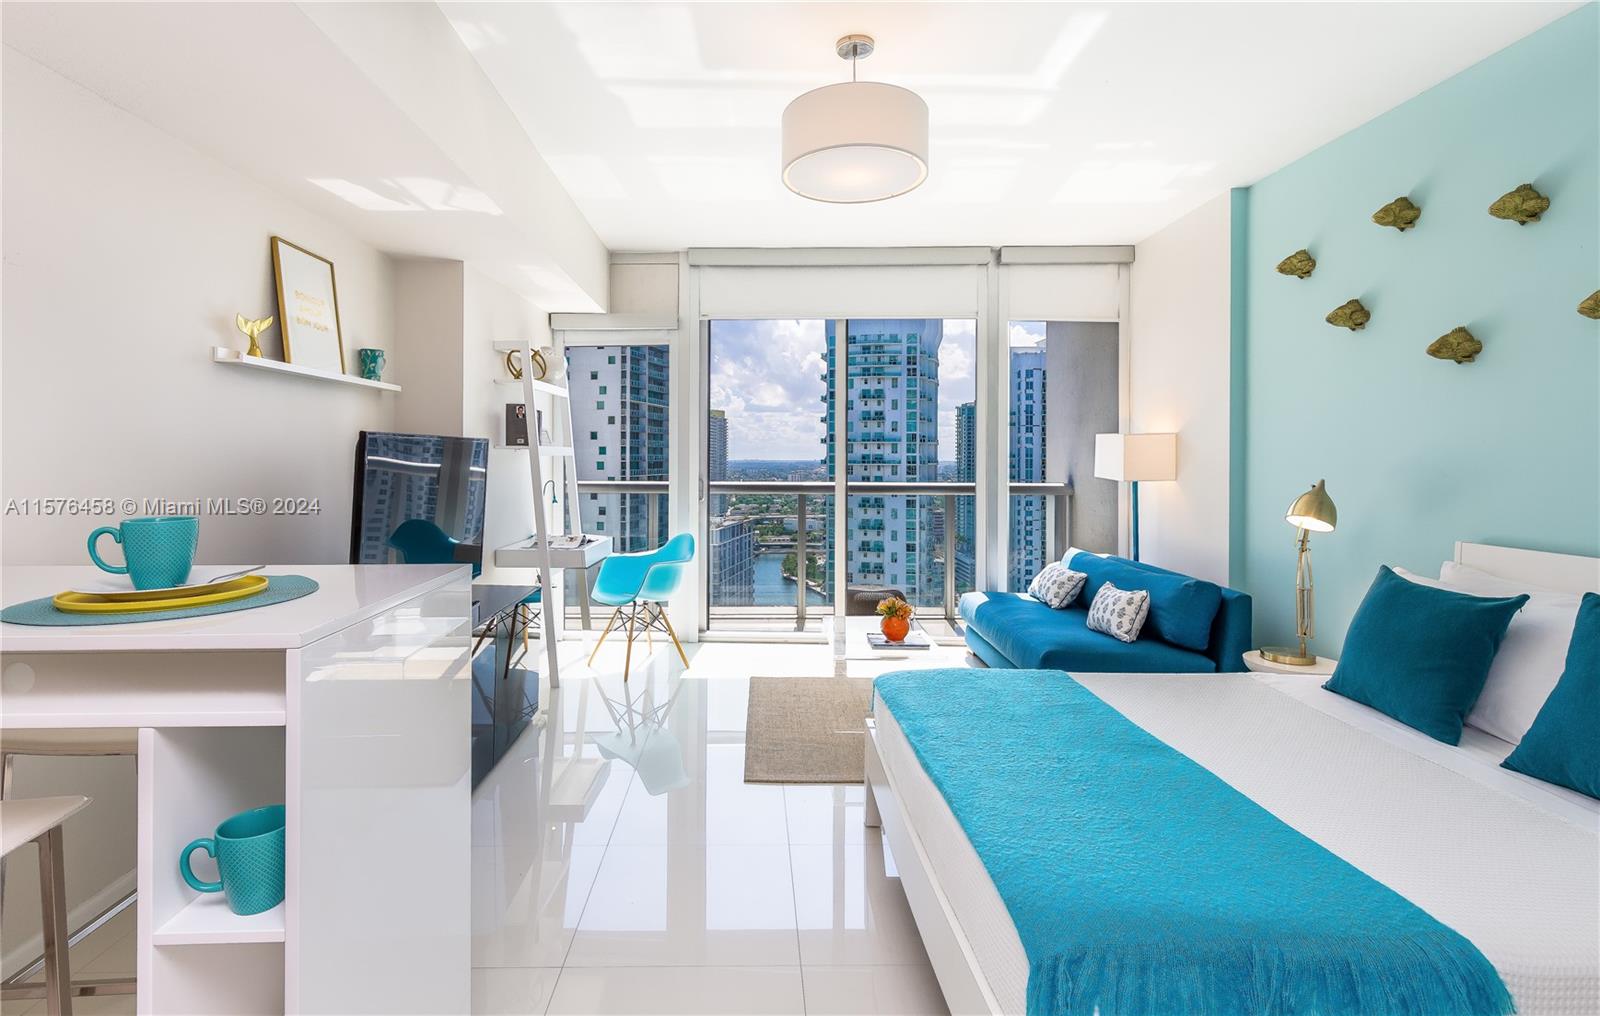 AIRBNB, no restrictions. On a high story, with floor-to-ceiling glass walls, this Icon Brickell Residence offers stunning city and river views with the bay in the background. Refined furniture and complements, and a fully equipped kitchen. It includes Bosch dishwasher, full-size washer/dryer, HD Smart LED TVs (100+ channels), plus web streaming), free fast Wi-Fi, Italian cabinets, and premium appliances by Wolf & Subzero, as well as solid marble counters. 
The luxurious Icon Brickell resort in Miami was designed by Philippe Starck, with dramatic views on Biscayne B